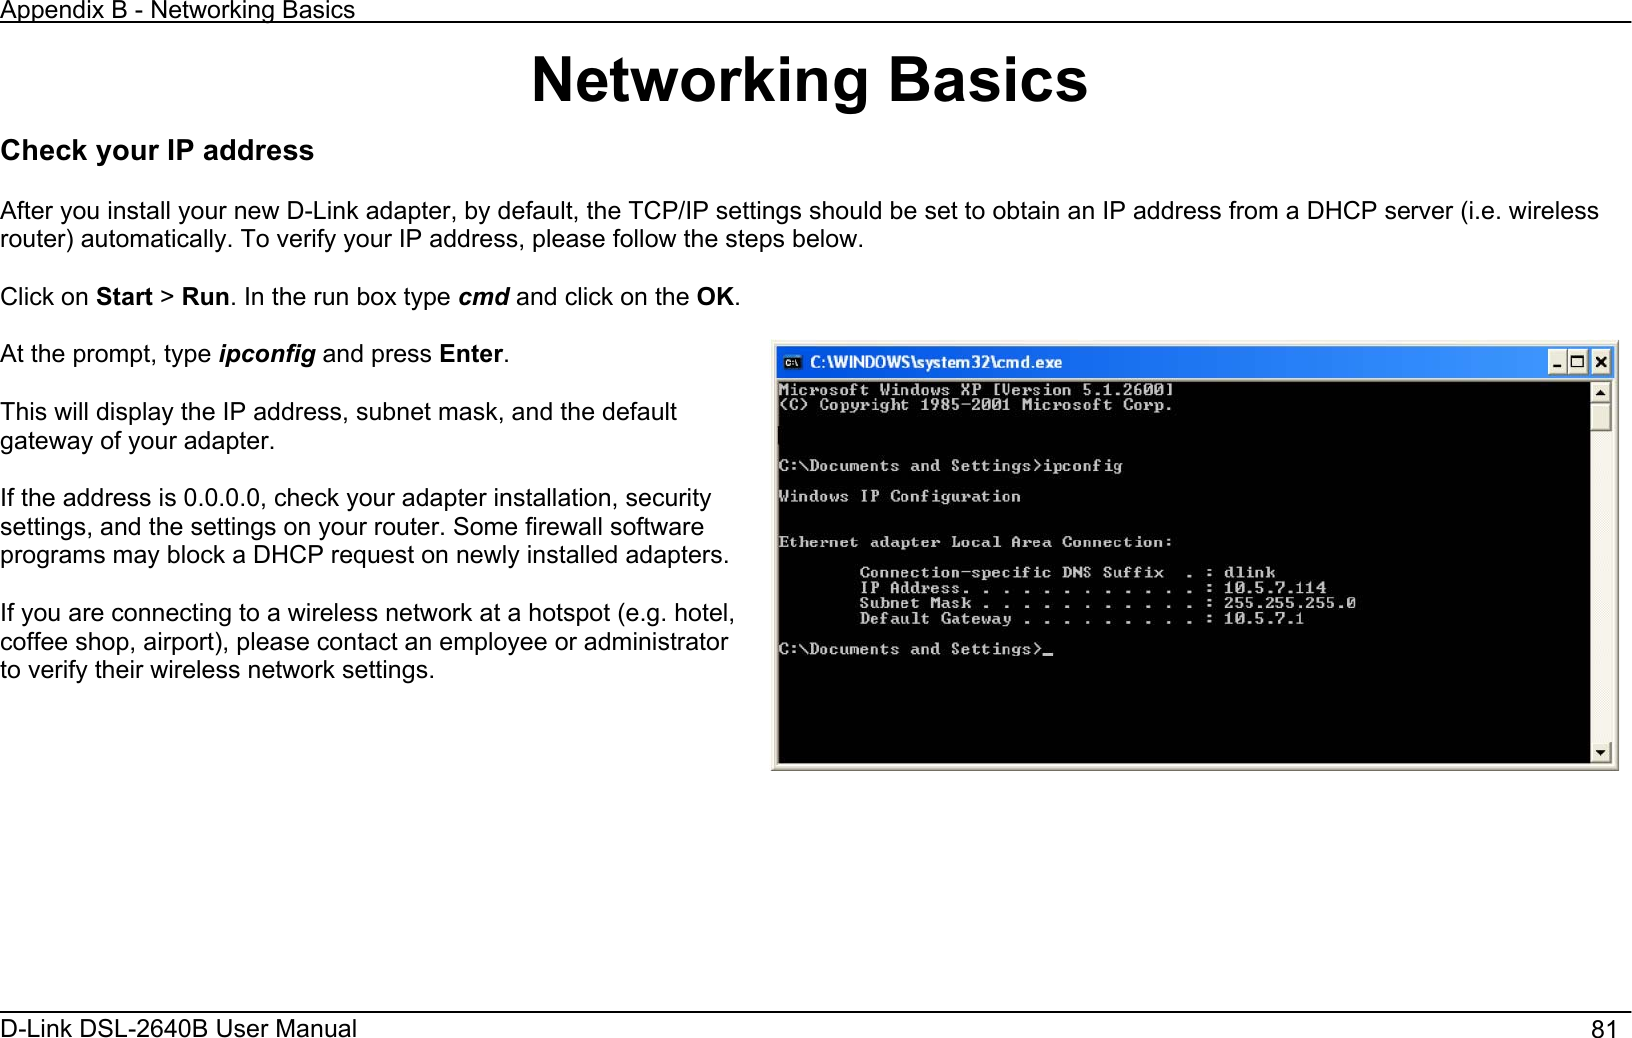 Appendix B - Networking Basics D-Link DSL-2640B User Manual                                       81Networking Basics Check your IP address After you install your new D-Link adapter, by default, the TCP/IP settings should be set to obtain an IP address from a DHCP server (i.e. wireless router) automatically. To verify your IP address, please follow the steps below. Click on Start &gt;Run. In the run box type cmd and click on the OK.At the prompt, type ipconfig and press Enter.This will display the IP address, subnet mask, and the default gateway of your adapter. If the address is 0.0.0.0, check your adapter installation, security settings, and the settings on your router. Some firewall software programs may block a DHCP request on newly installed adapters. If you are connecting to a wireless network at a hotspot (e.g. hotel, coffee shop, airport), please contact an employee or administrator to verify their wireless network settings. 